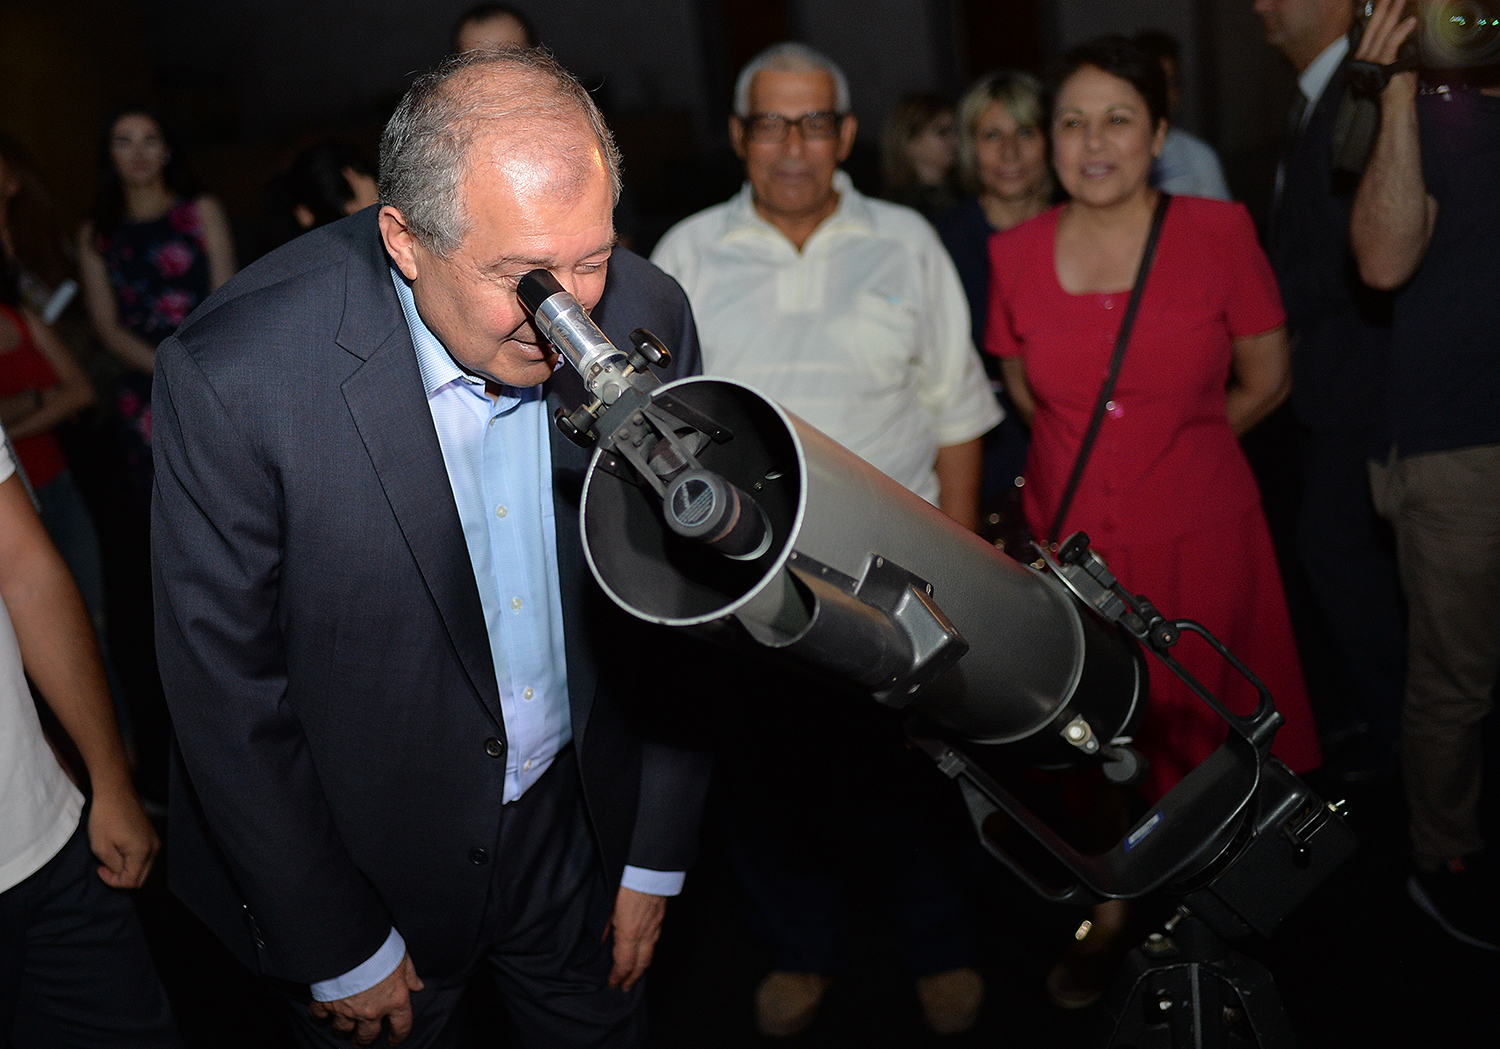 Amateur stargazing was organized on the Presidential Palace premise